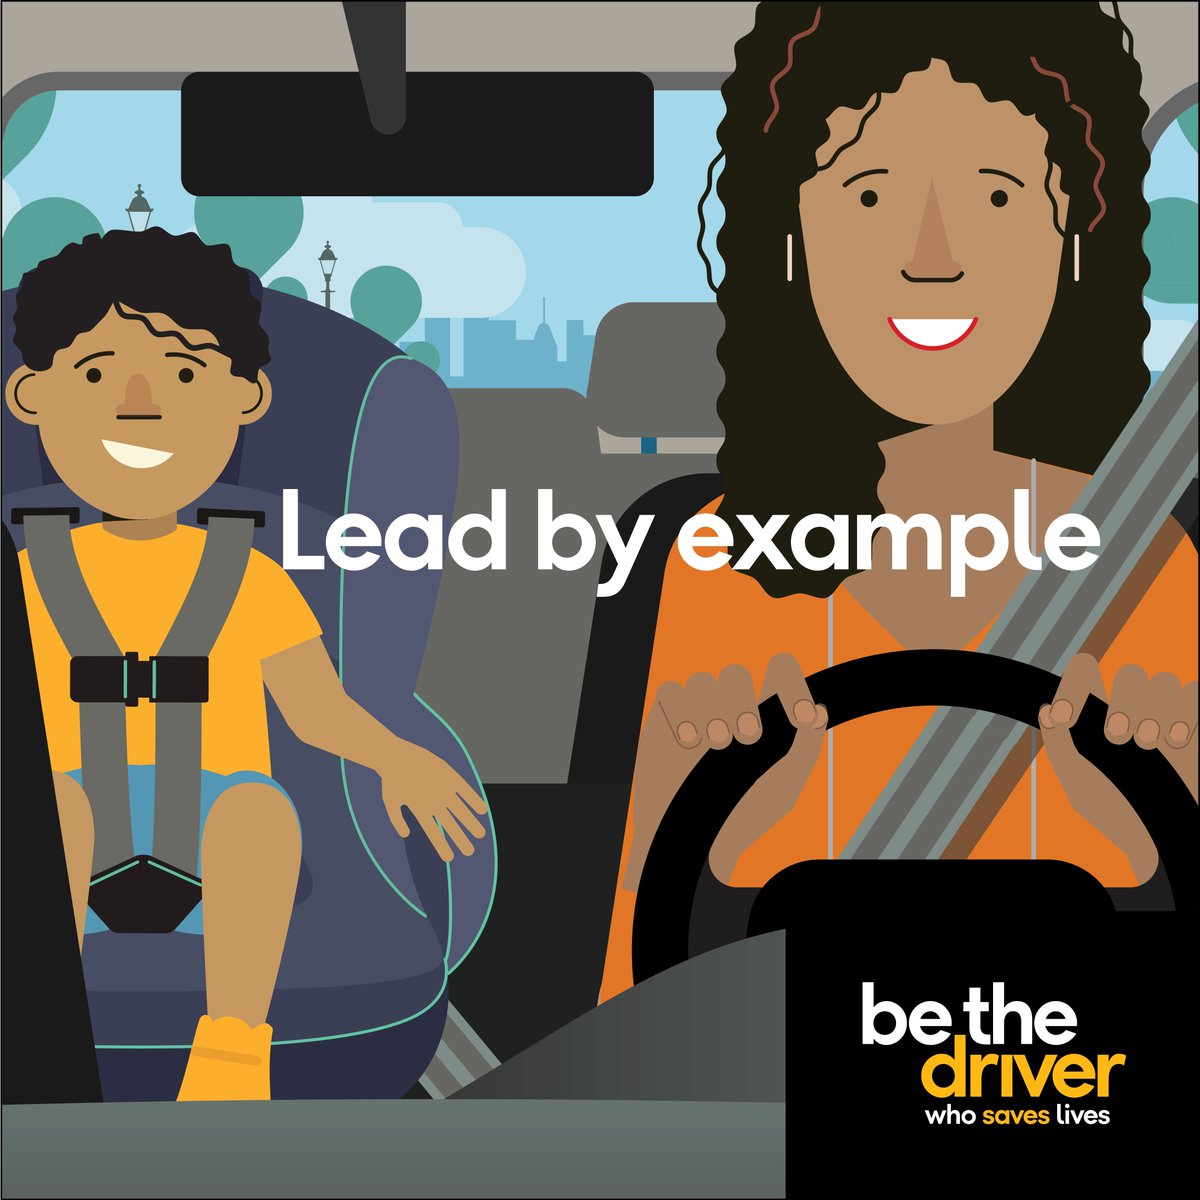 Front seat.  Back seat. Car seat. Wherever you’re sitting, always #BuckleUp. Questions about car seat use? Contact Maryland Kids in Safety Seats, 300-370-SEAT or mdkiss.org. #BeTheDriver #MDOTSafety